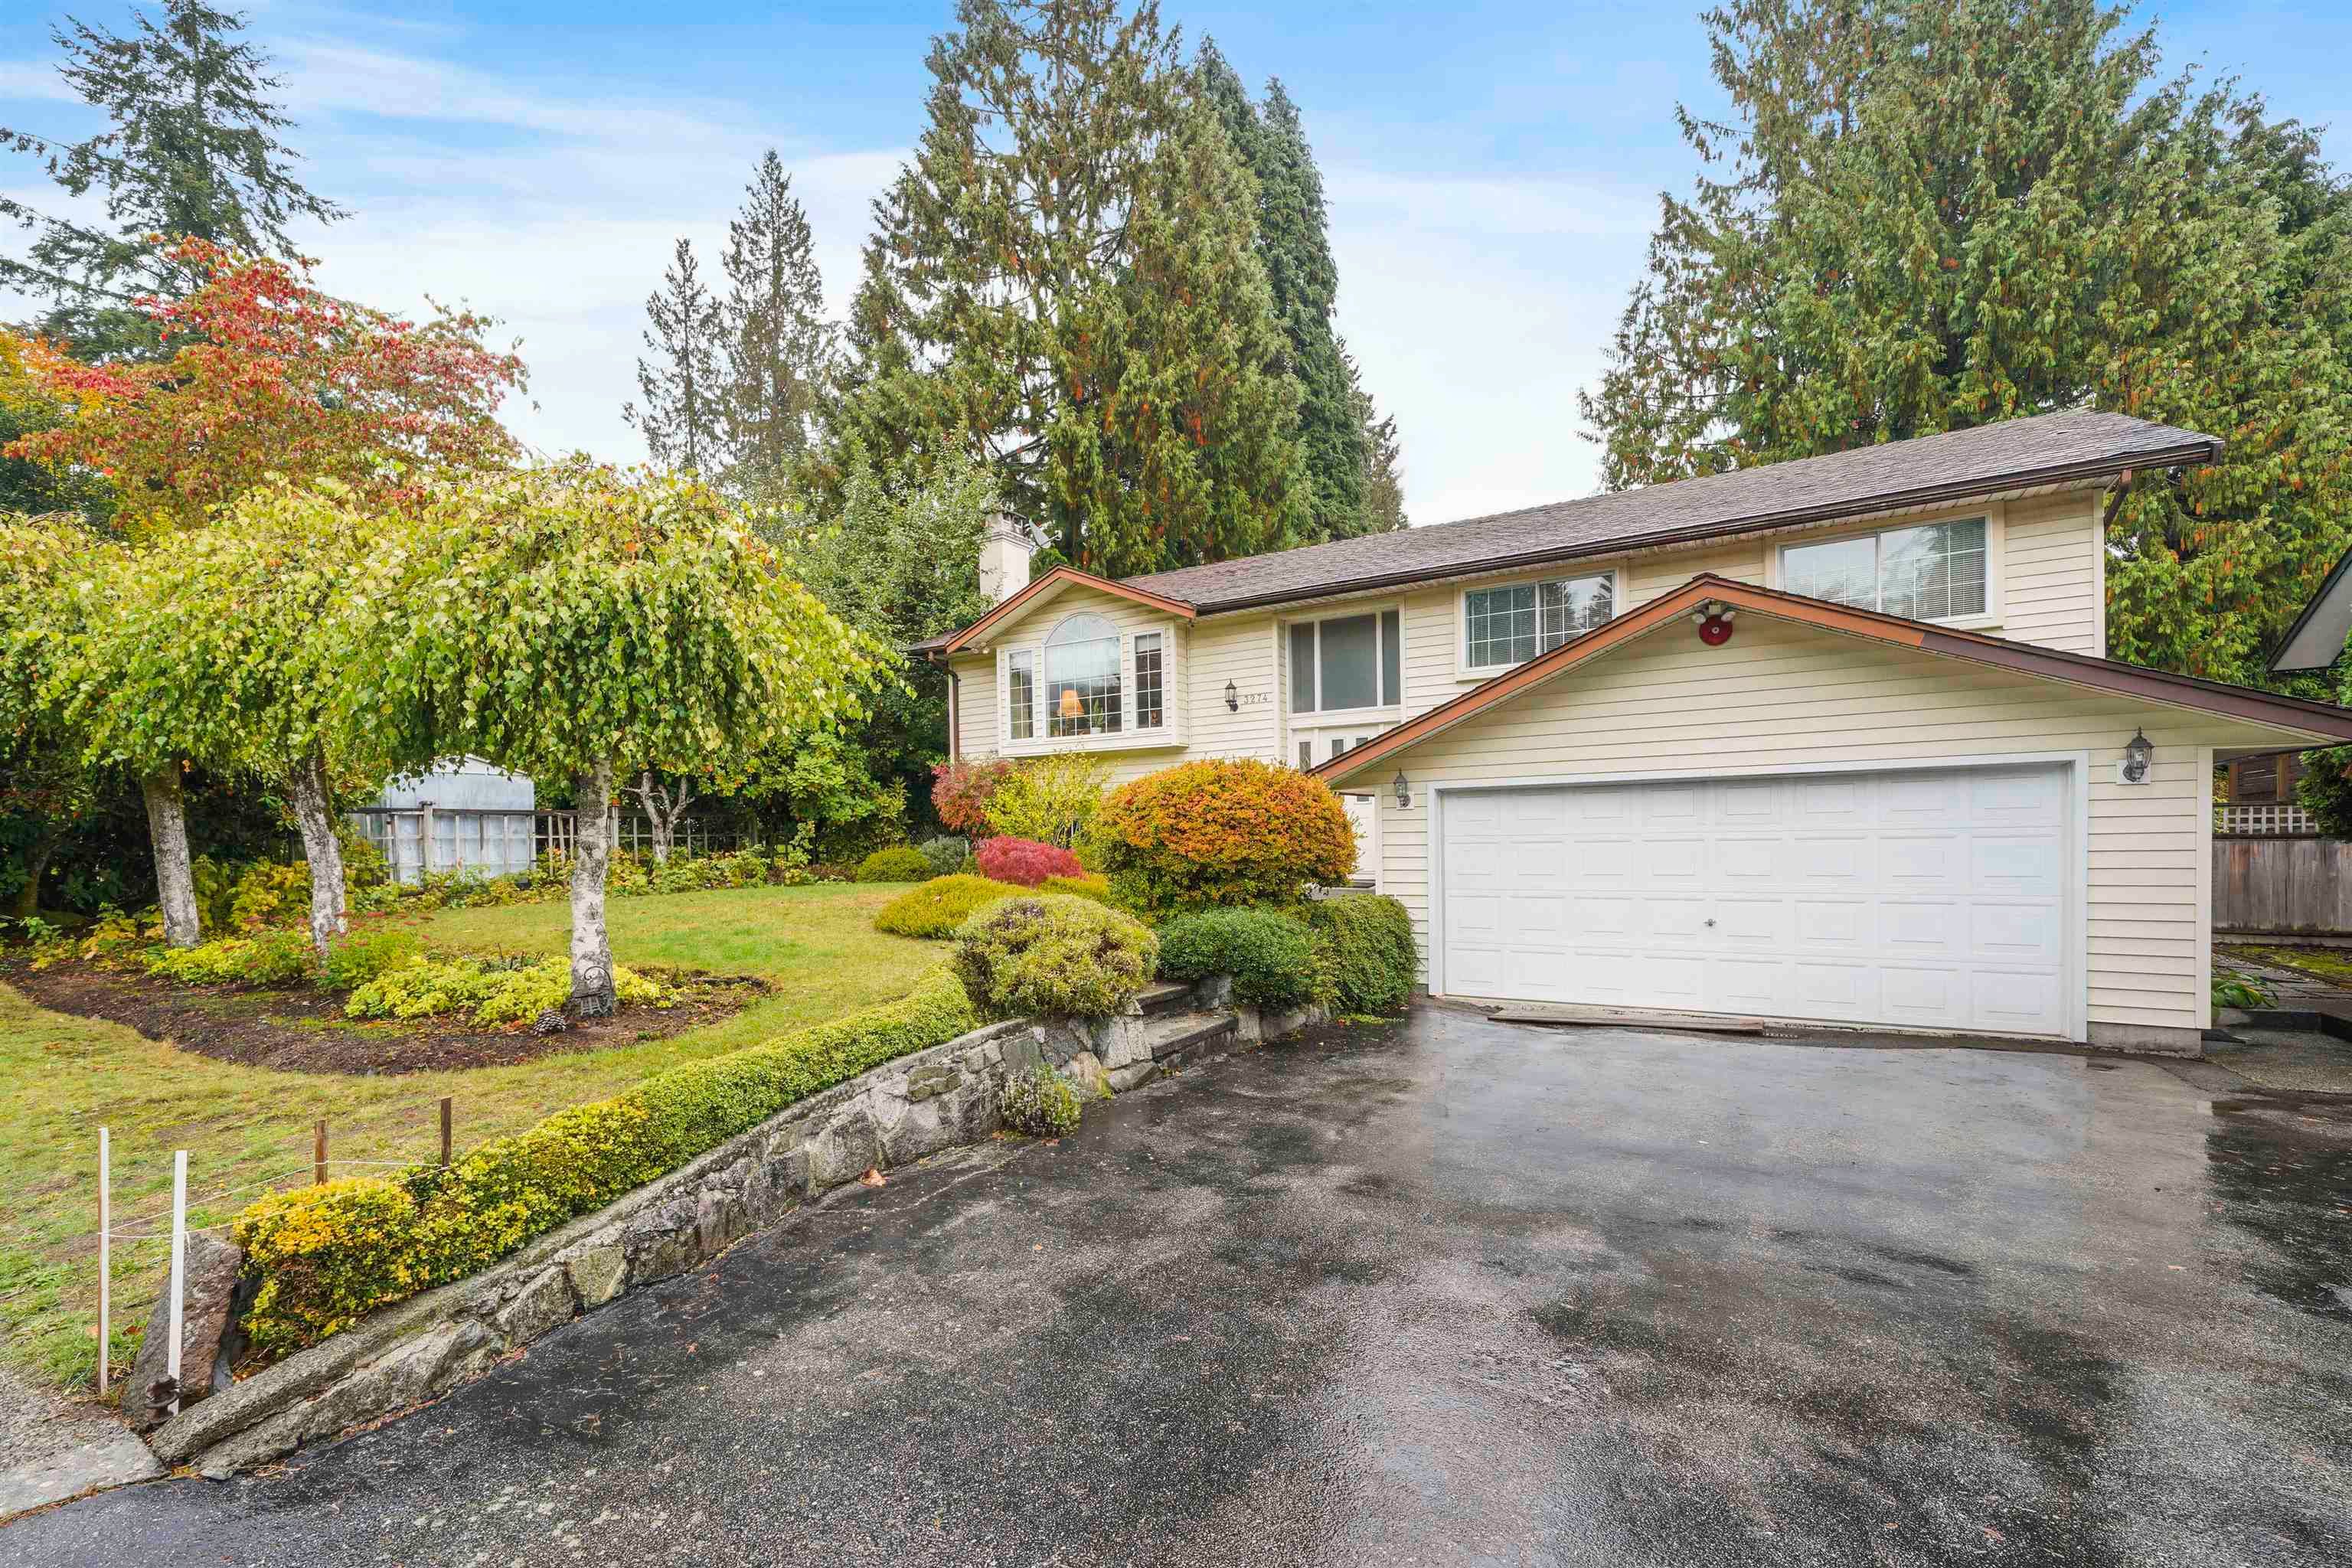 I have sold a property at 3274 HOSKINS RD in North Vancouver
